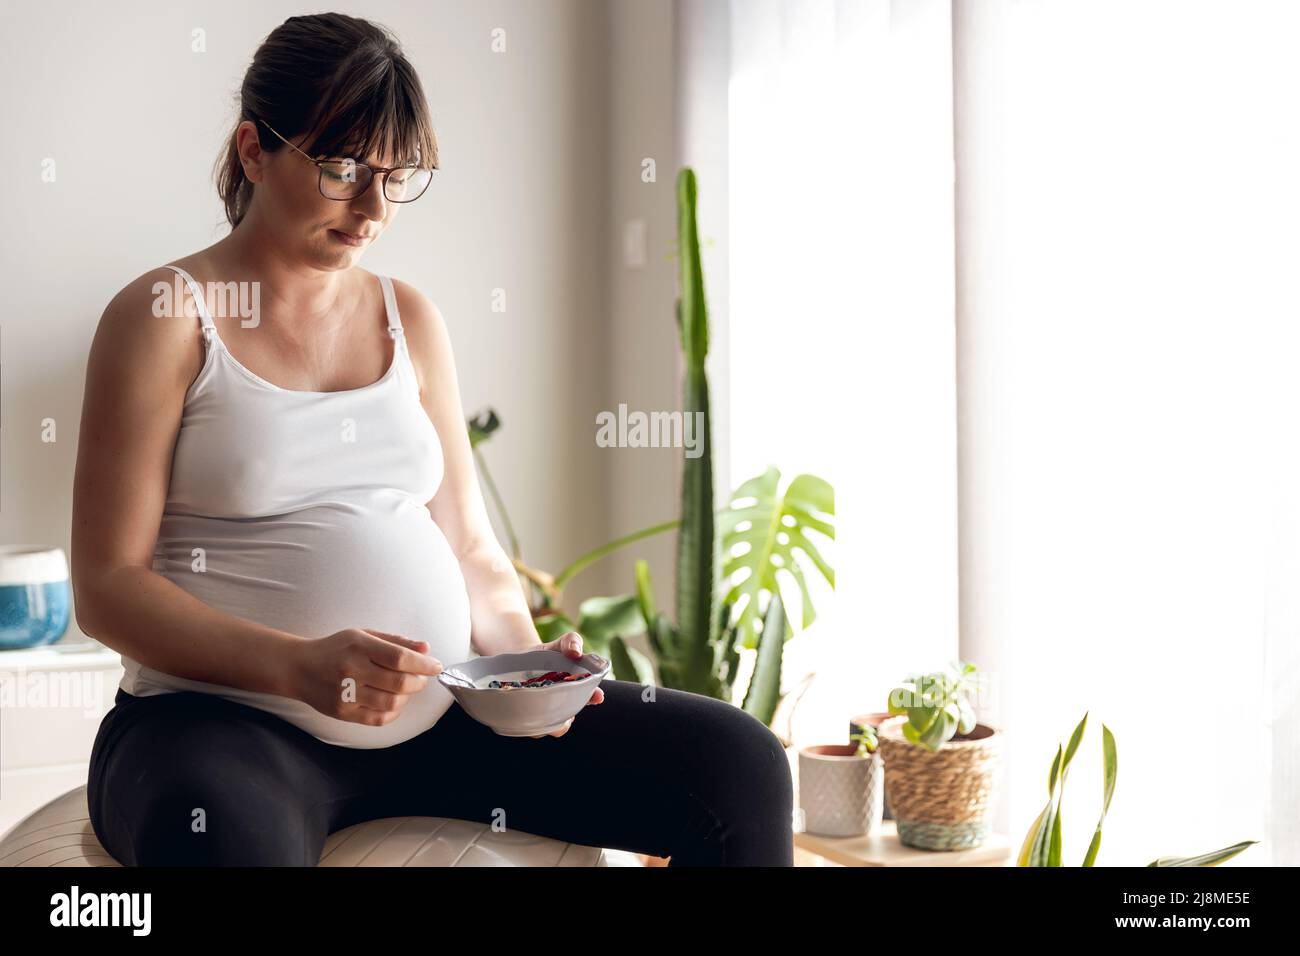 Pregnant woman working at home resting and eating healthy food Stock Photo